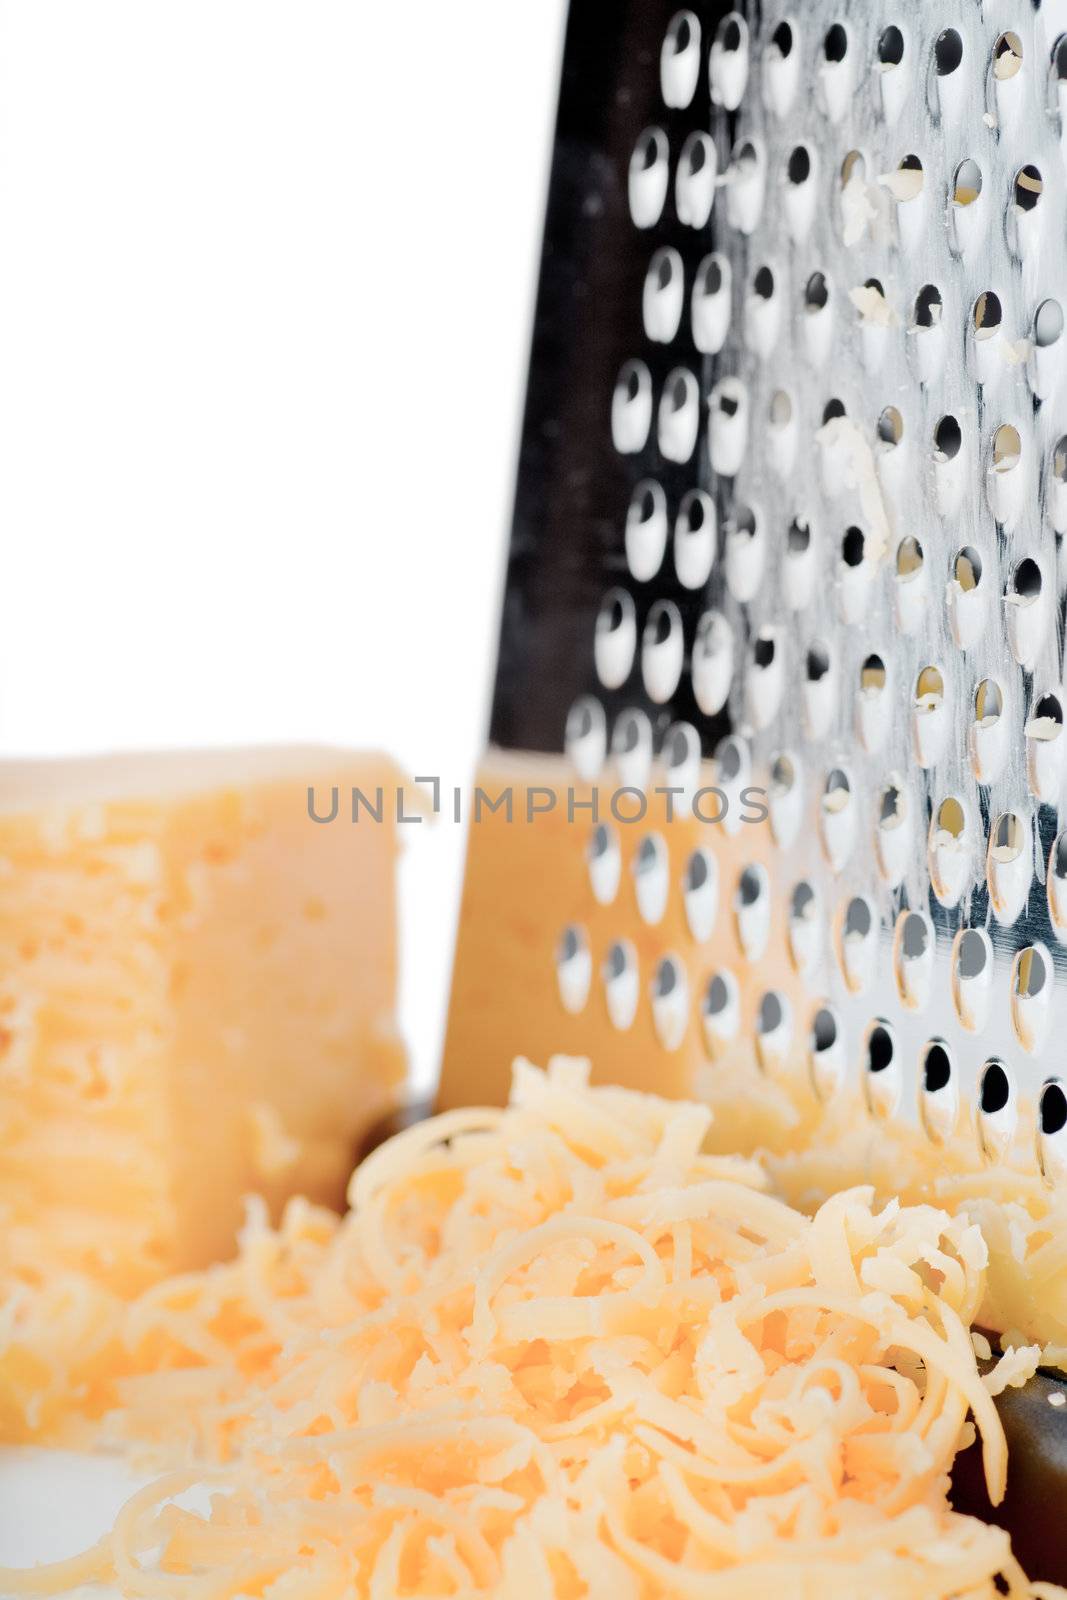 Grated cheese by AGorohov